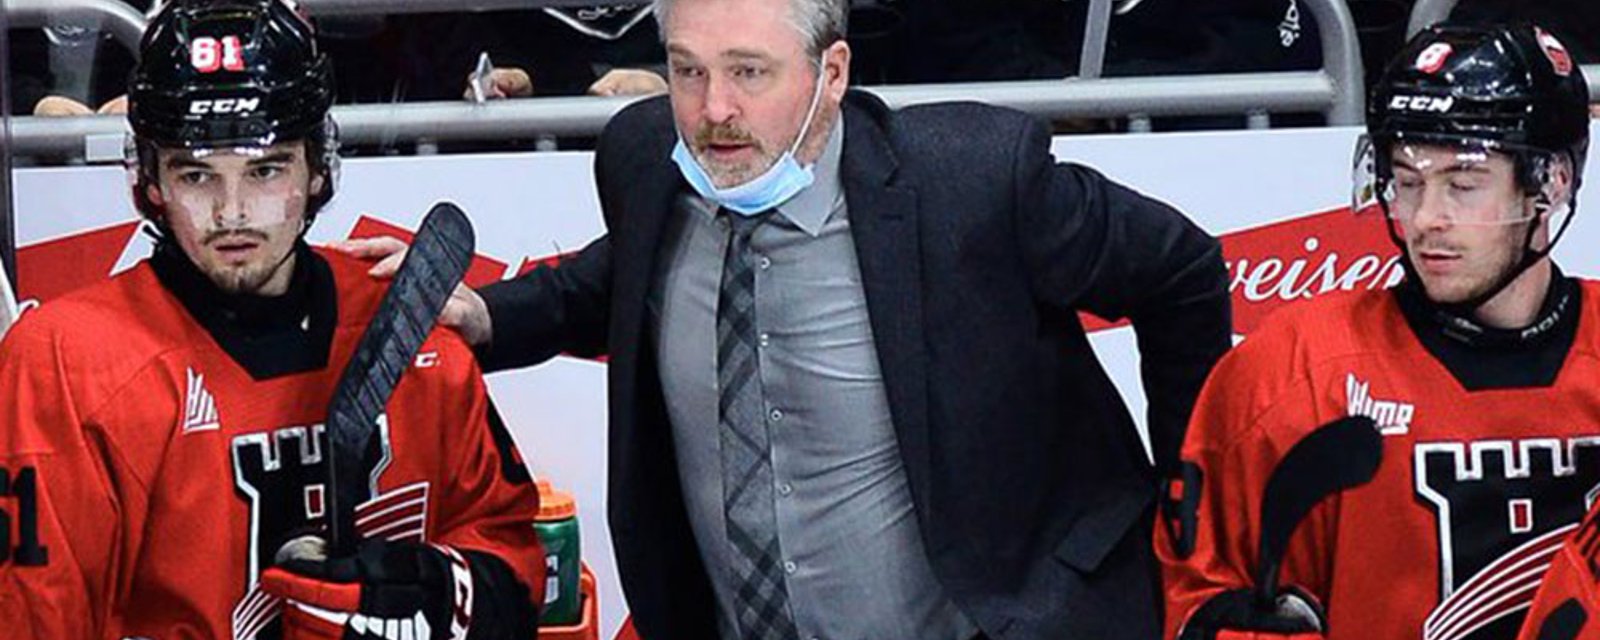 Patrick Roy goes ballistic, gets tossed out of QMJHL game